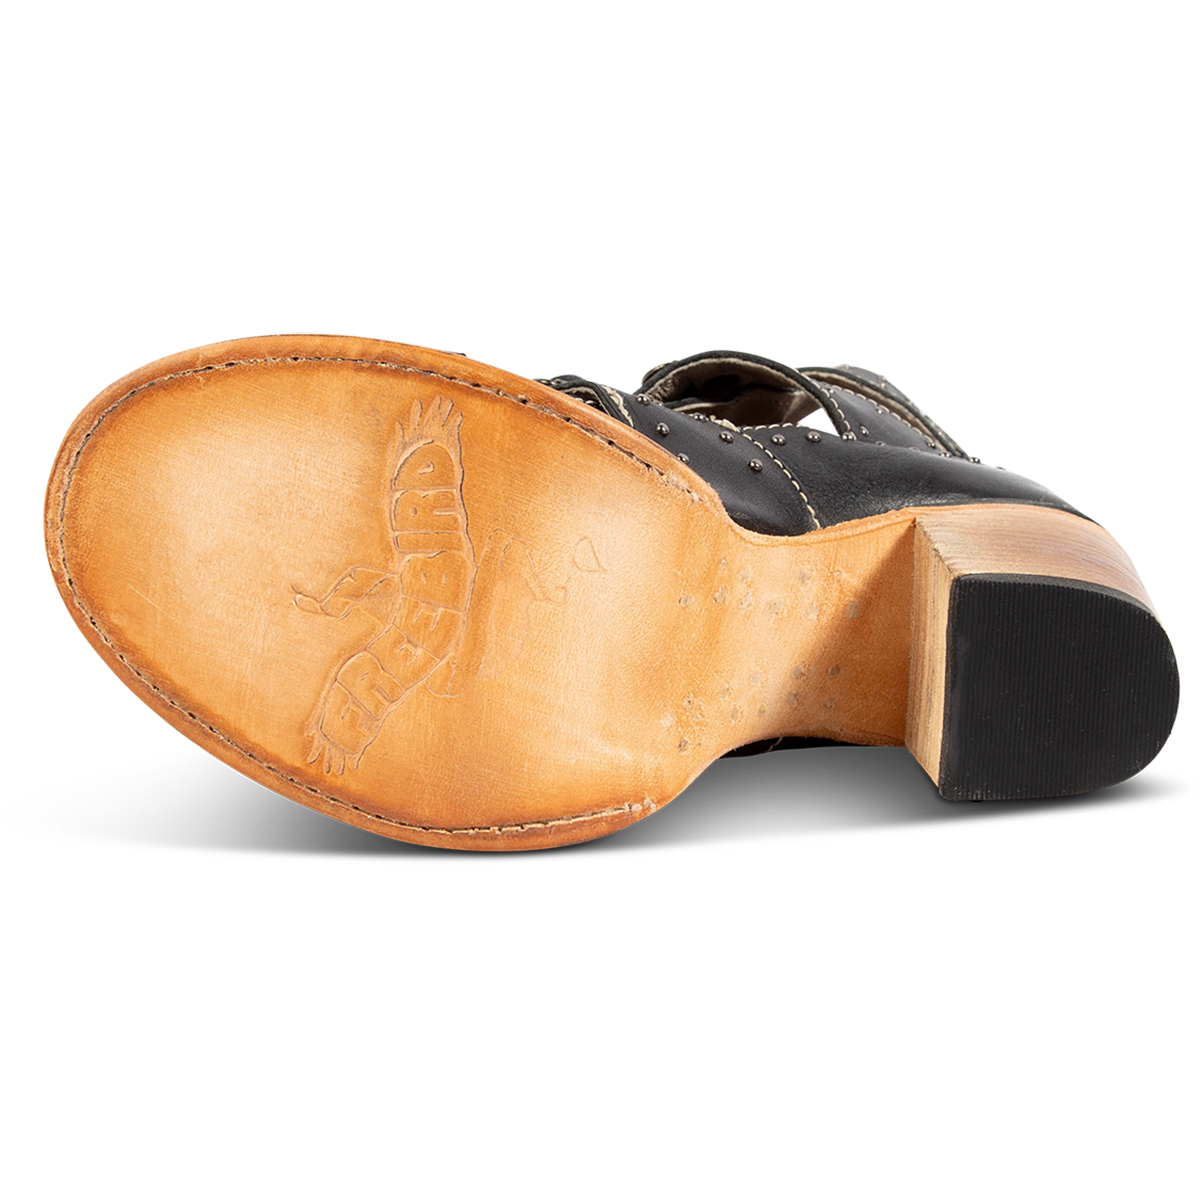 Leather sole imprinted with FREEBIRD on women's Brandy white black embossed leather sandal